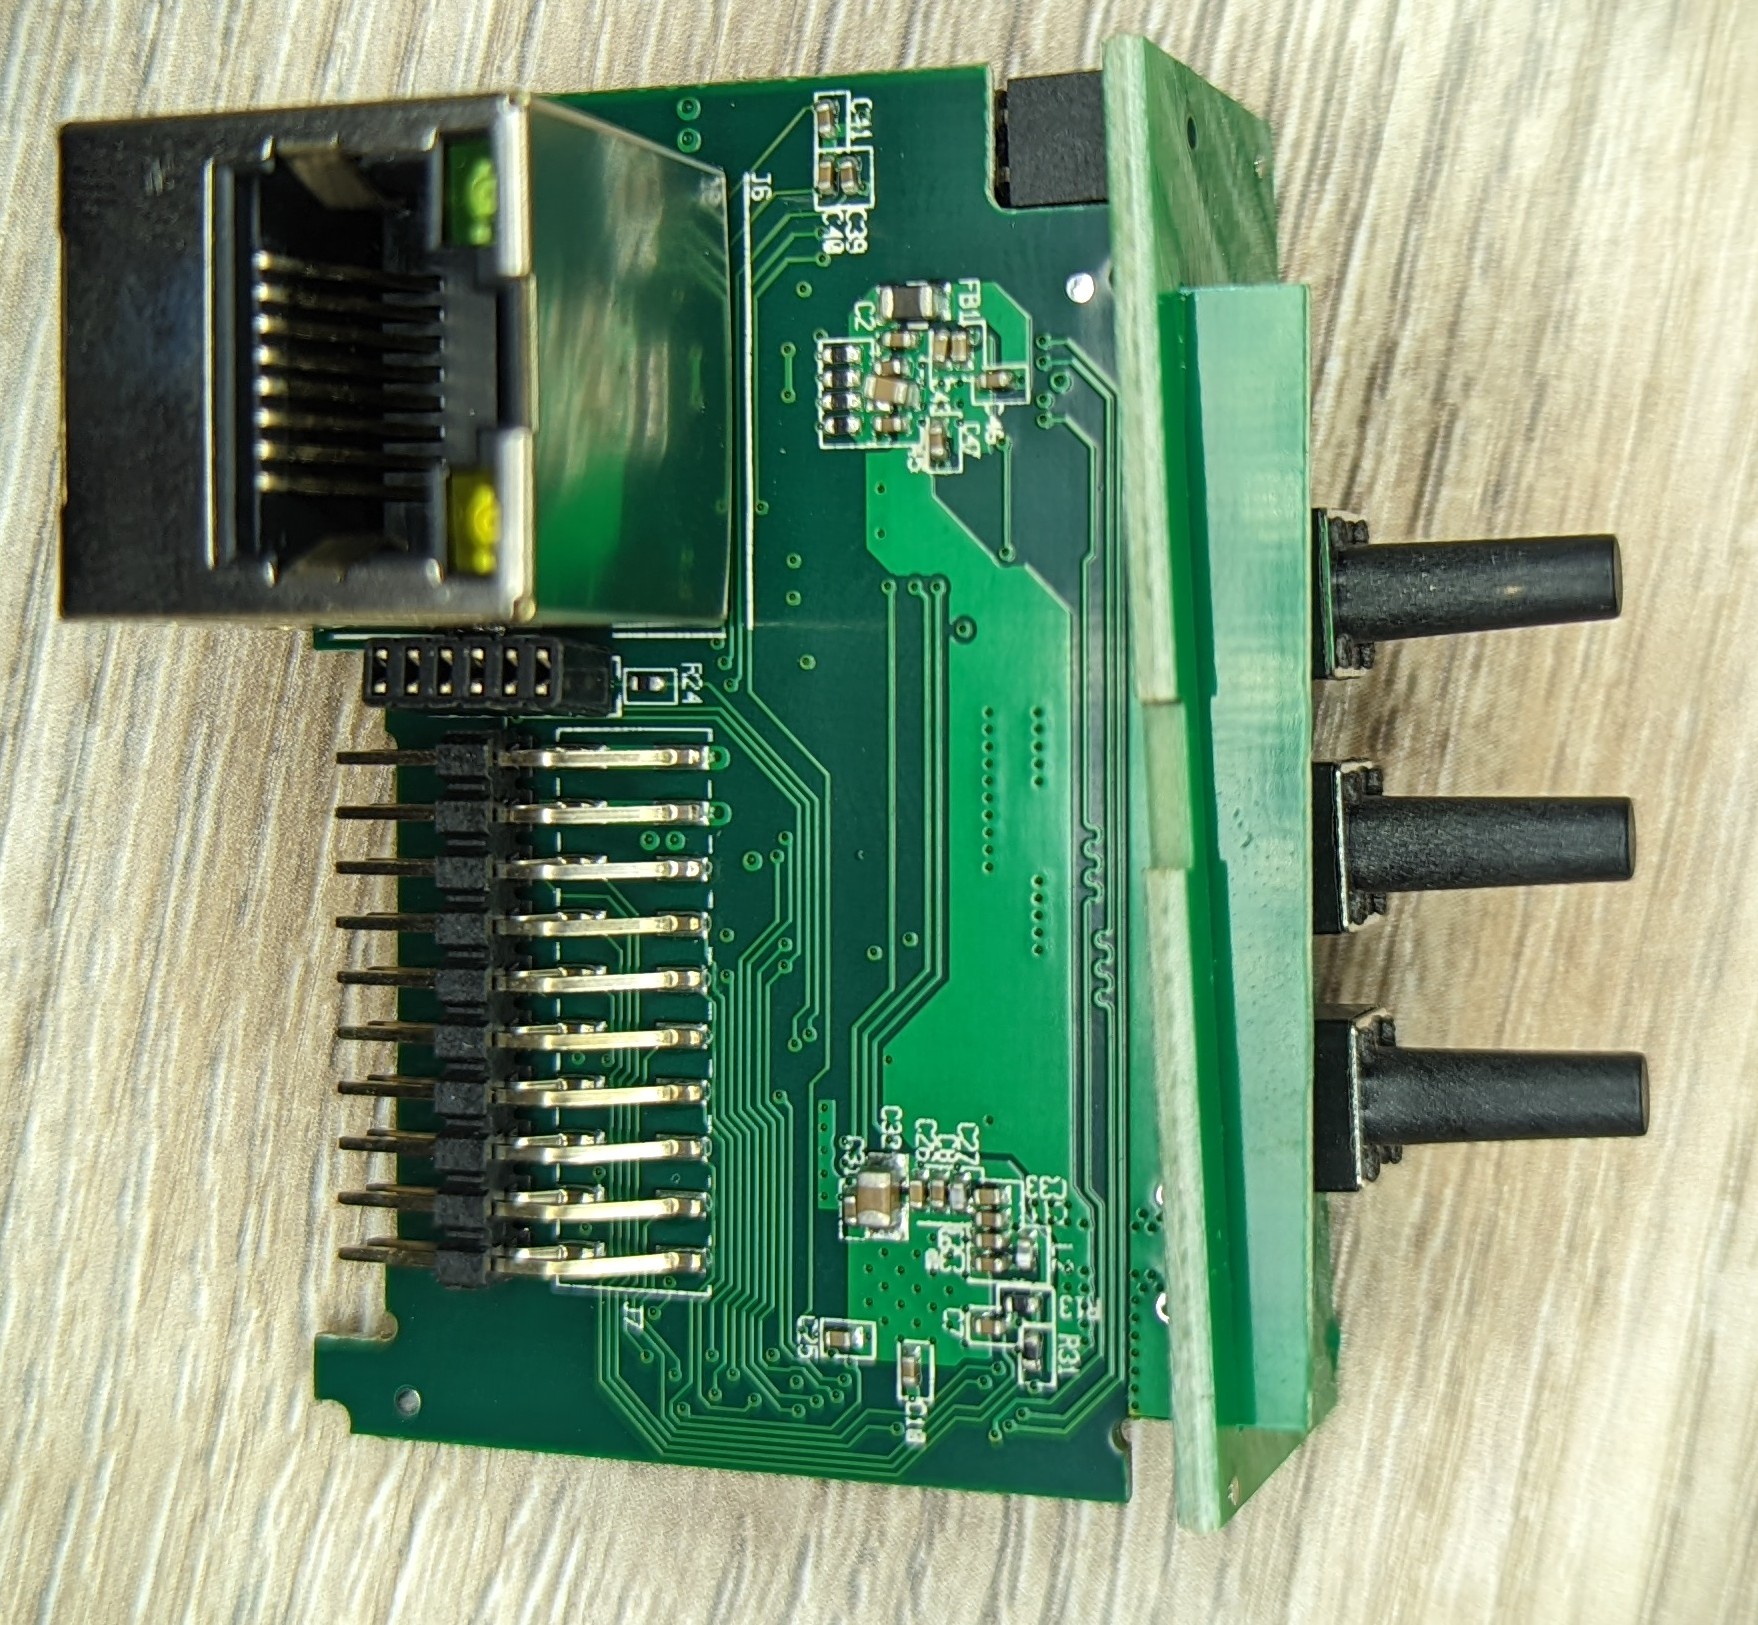 Picture showing primary MCU daughterboard from the side with the ethernet jack attached.